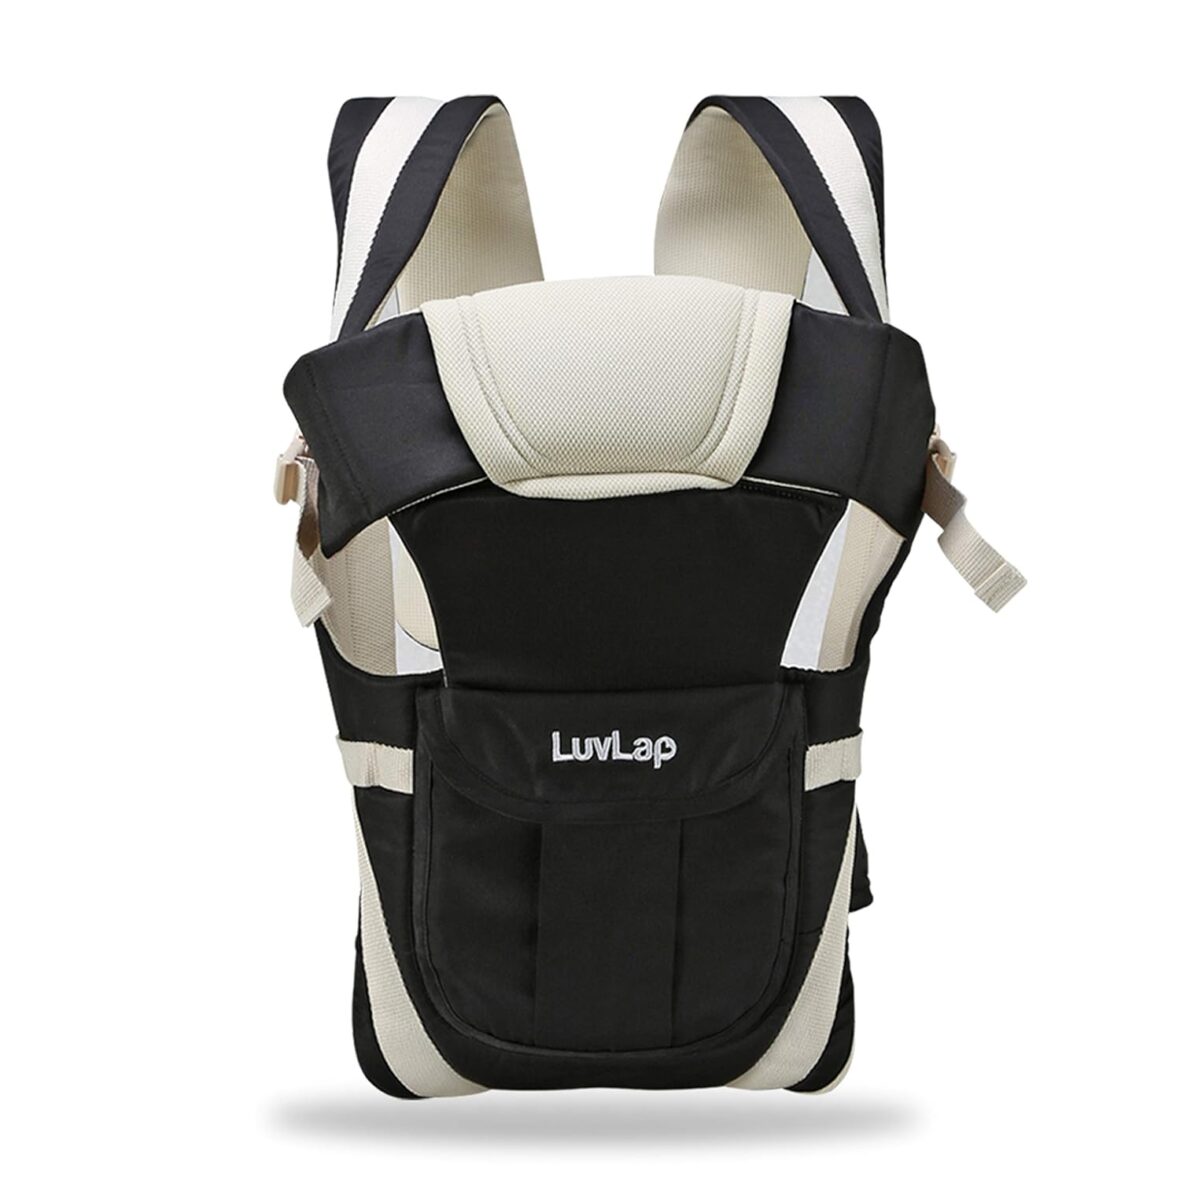 LuvLap Elegant Baby Carrier with 4 carry positions, Baby carrier for 4 to 24 months baby, Adjustable New-born to Toddler Carrier with cushioned leg support, Max weight Up to 15 Kgs